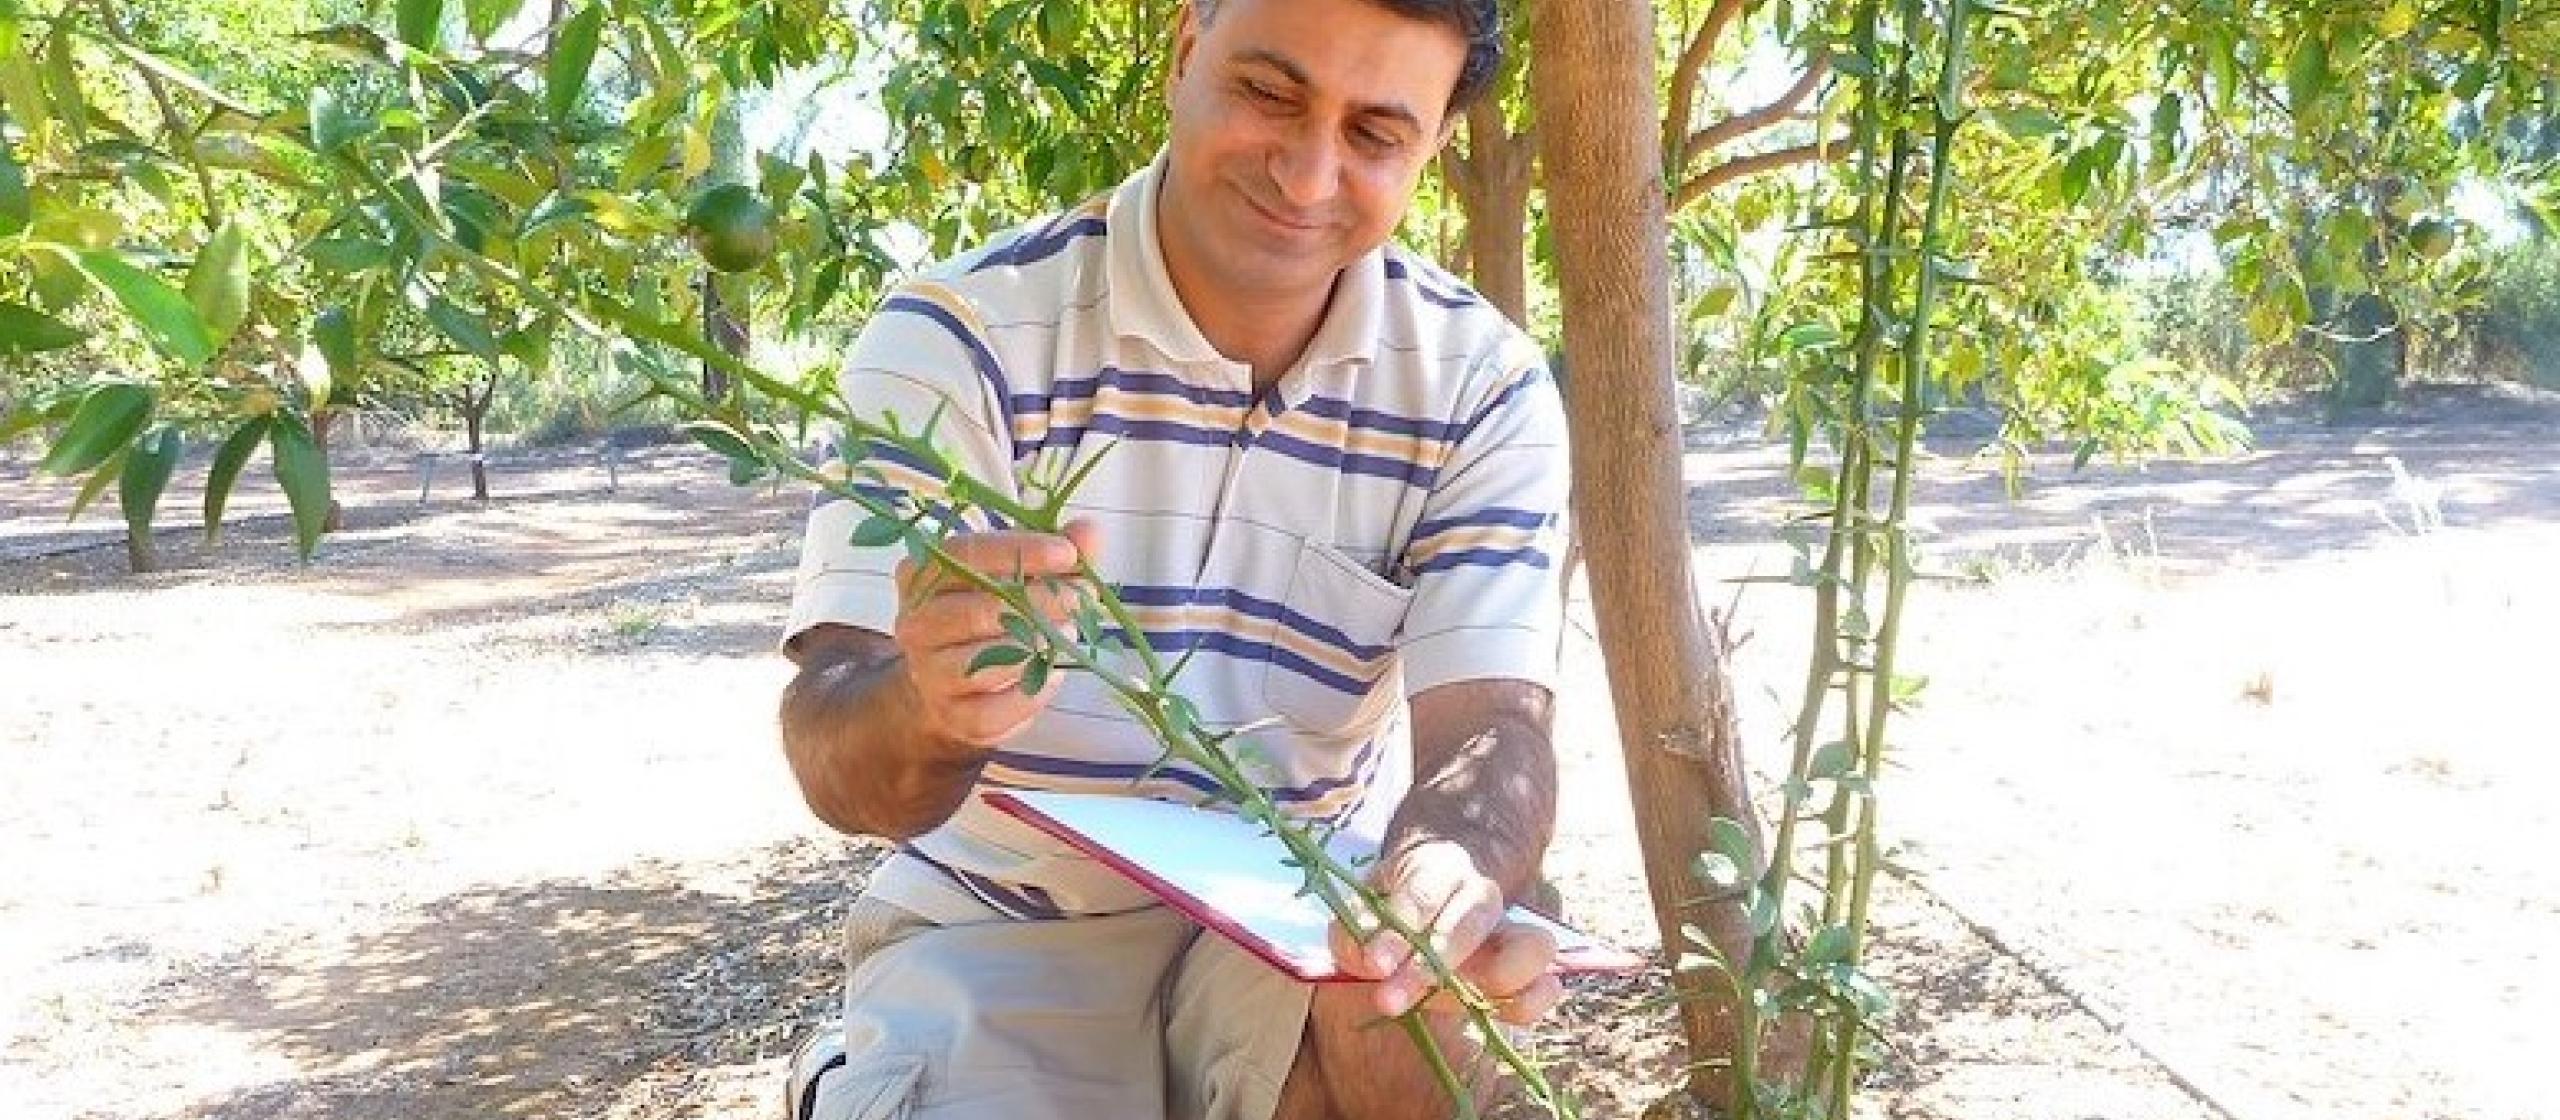 A man inspects his citrus tree